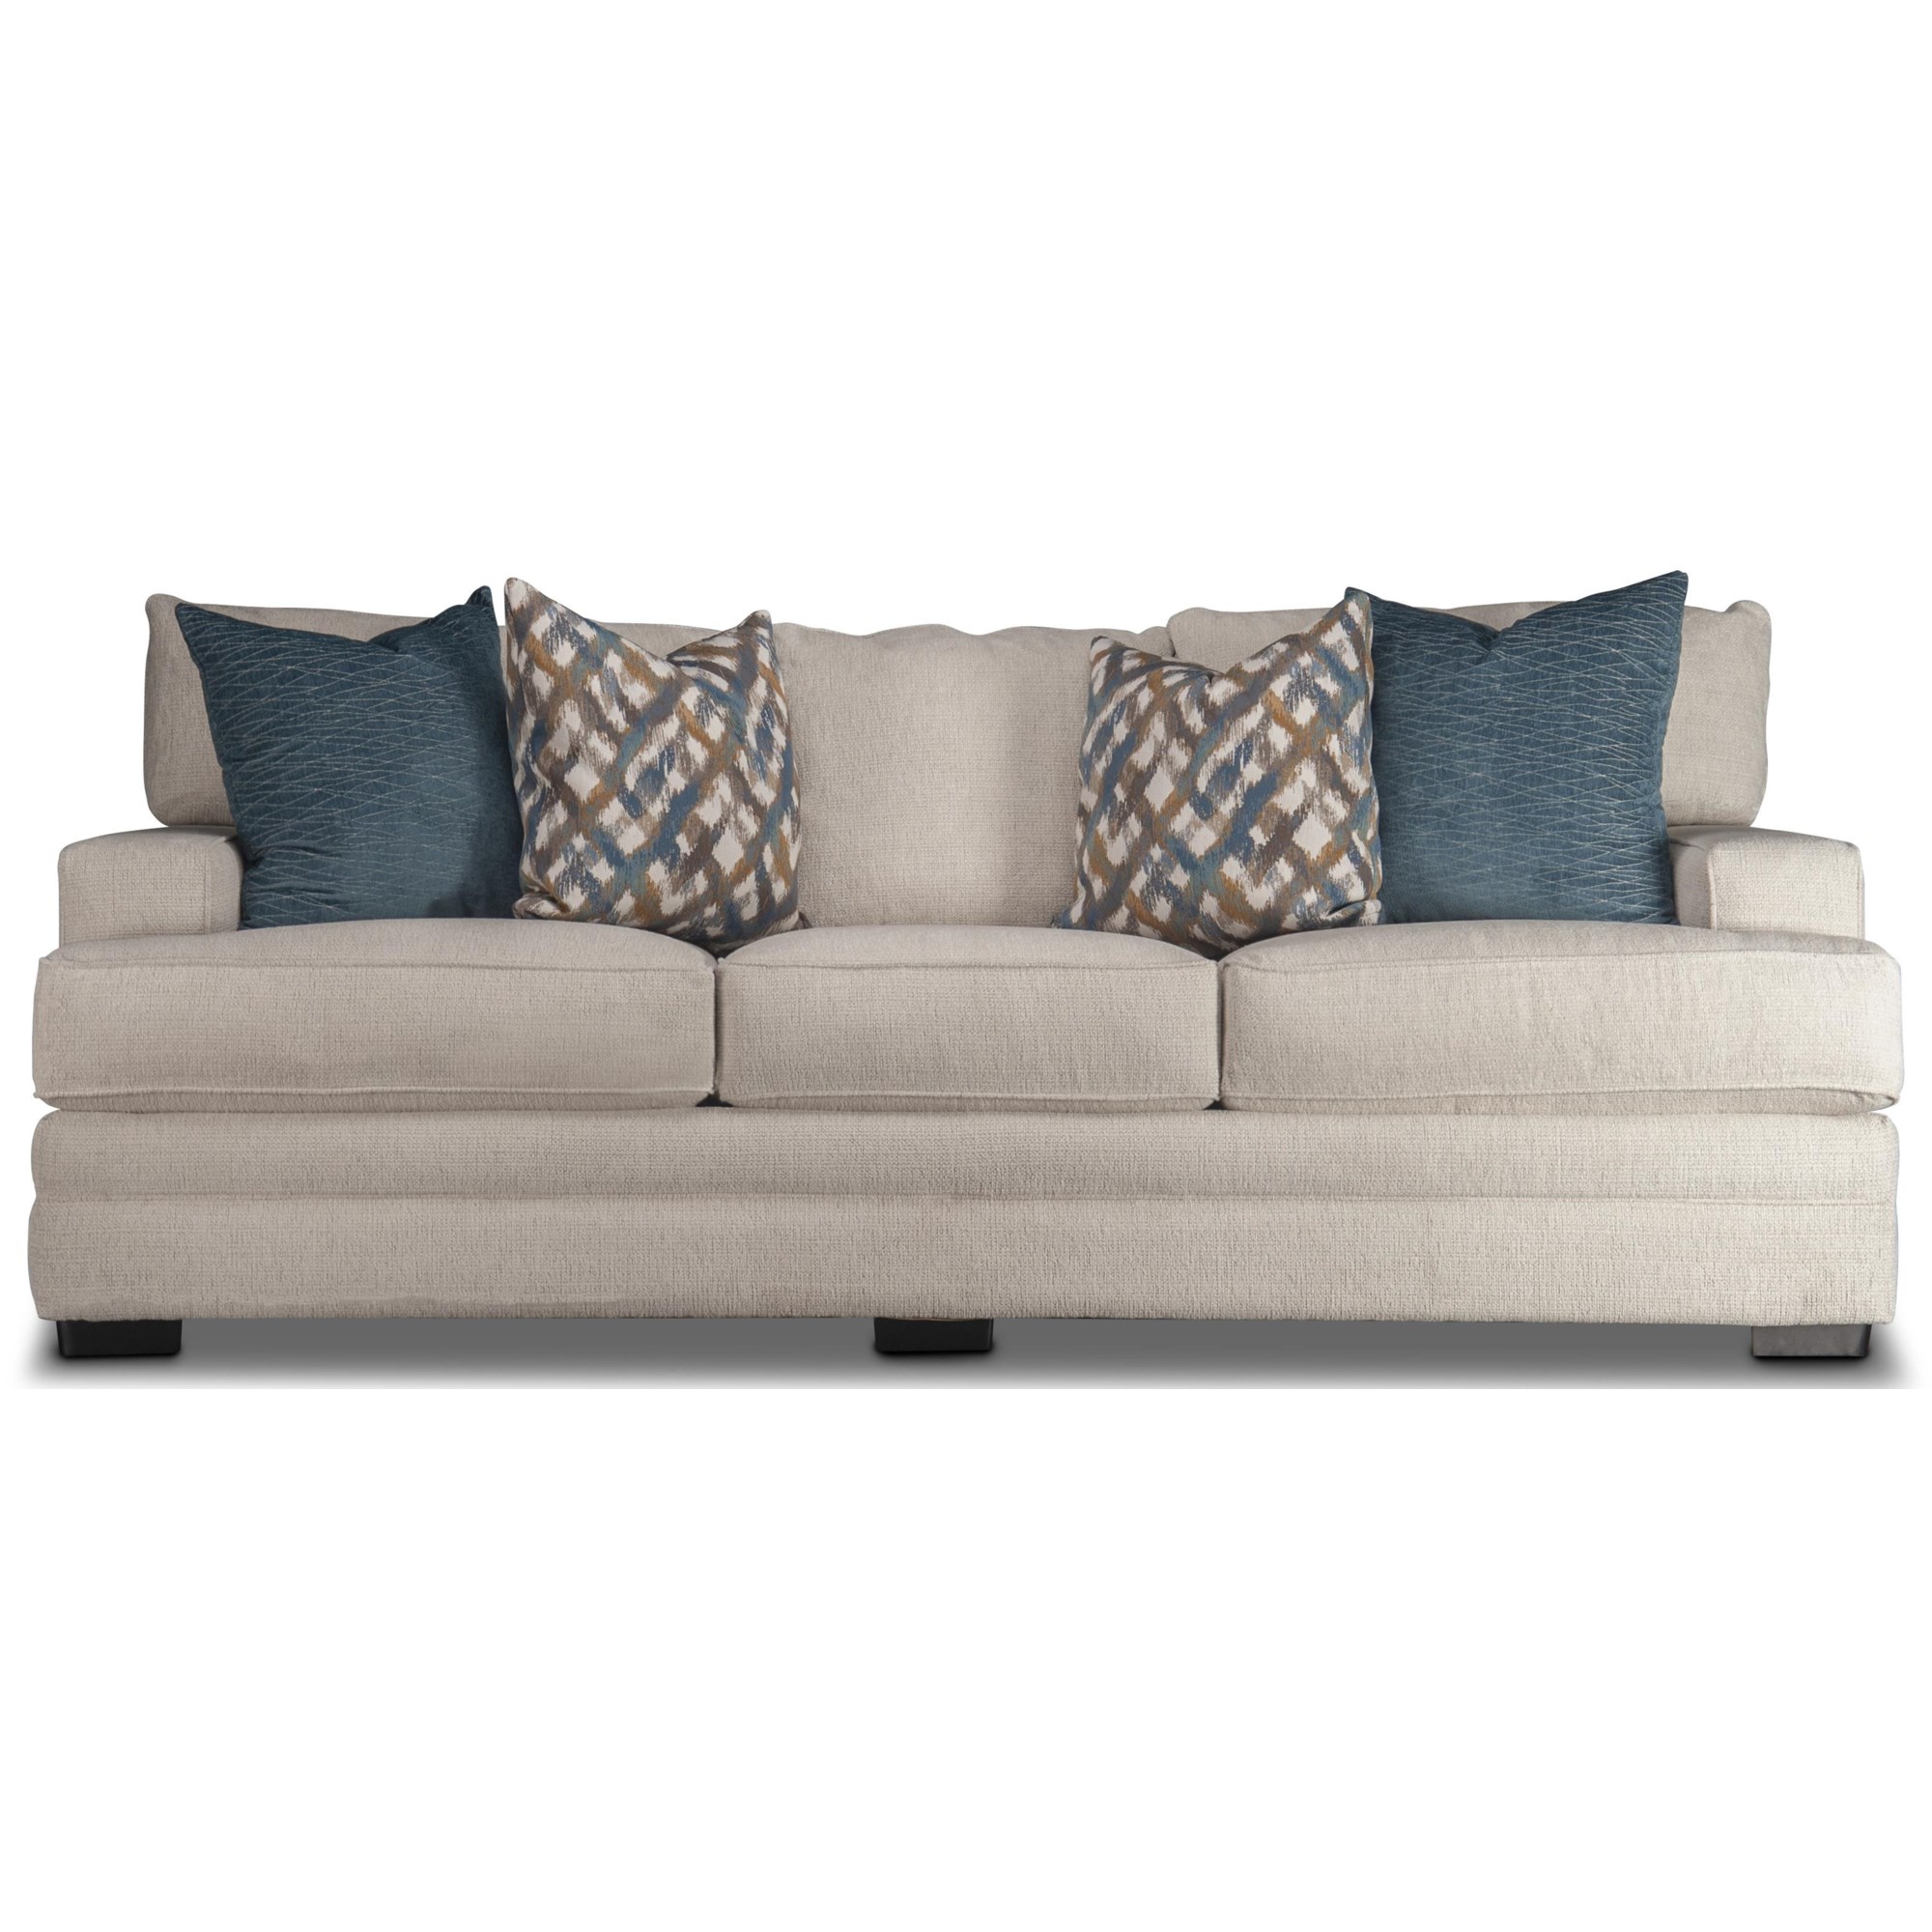 WHite and blue pillows accent a white linen couch placed in a